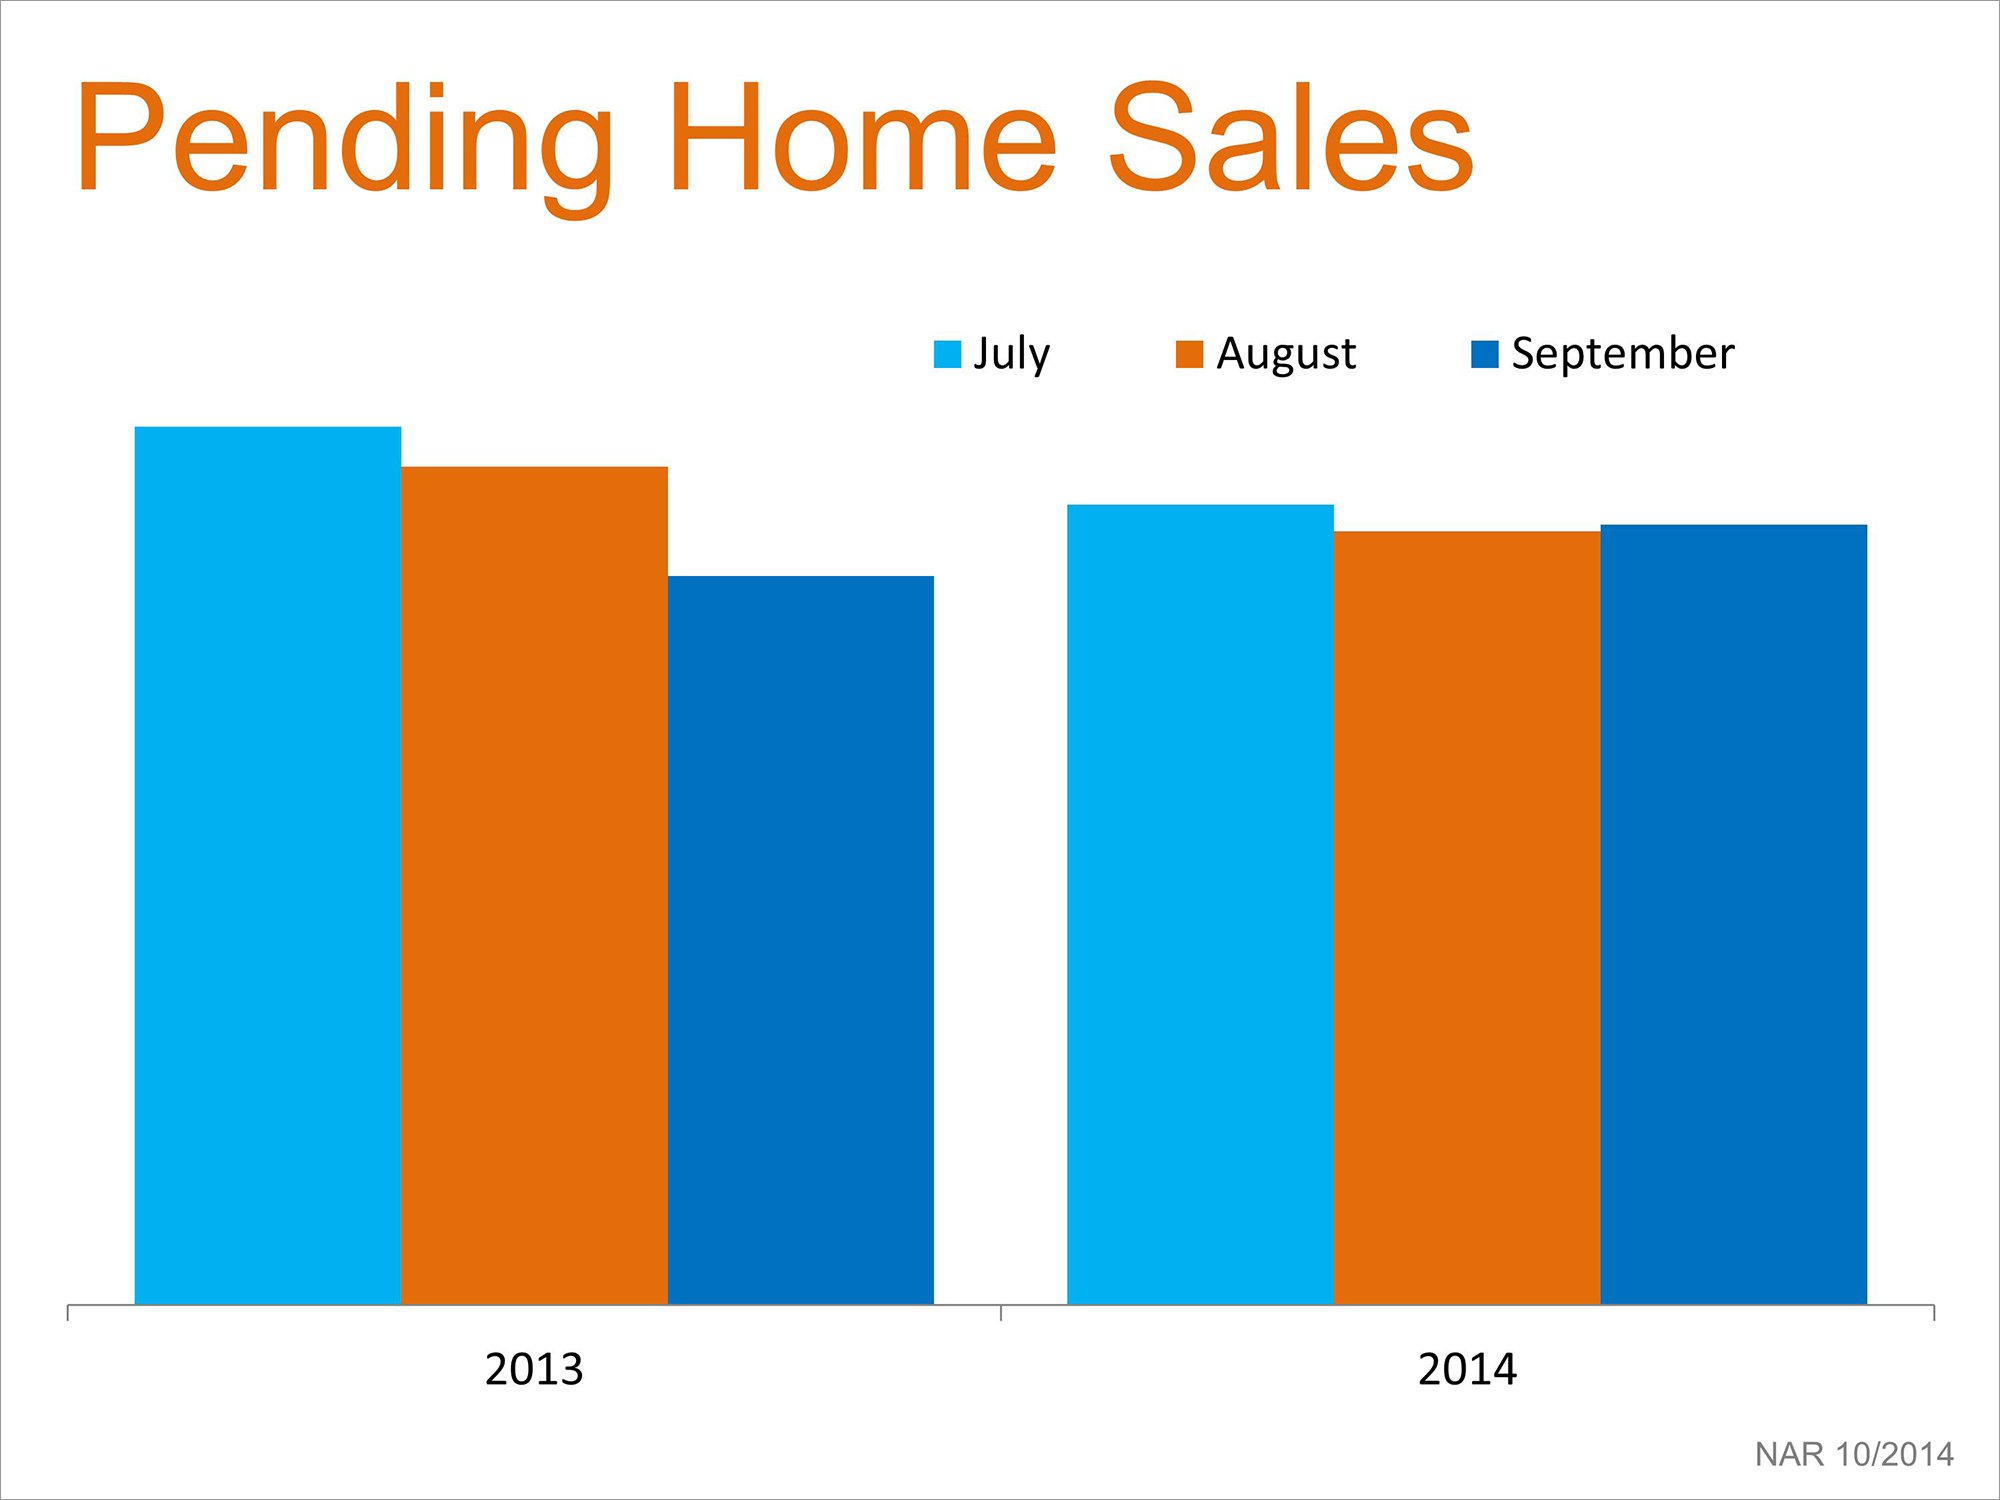 Housing Momentum Remains Strong Going into 4thQ | Pending Home Sales | Keeping Current Matters